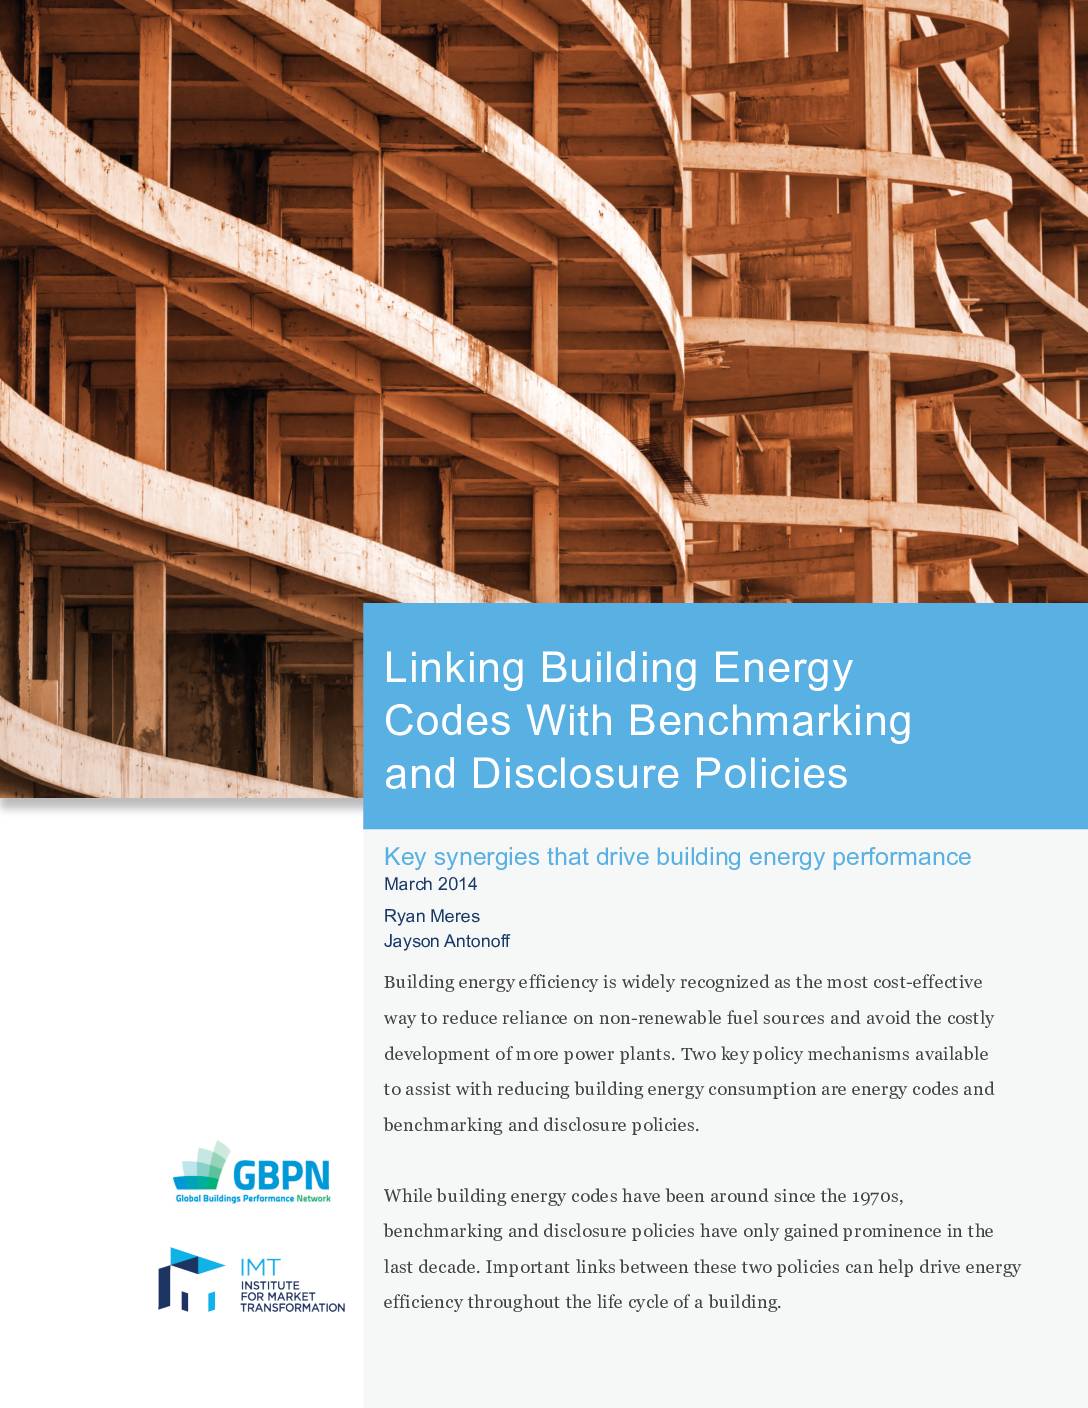 Linking Building Energy Codes With Benchmarking and Disclosure Policies, Key Synergies that Drive Building Energy Performance